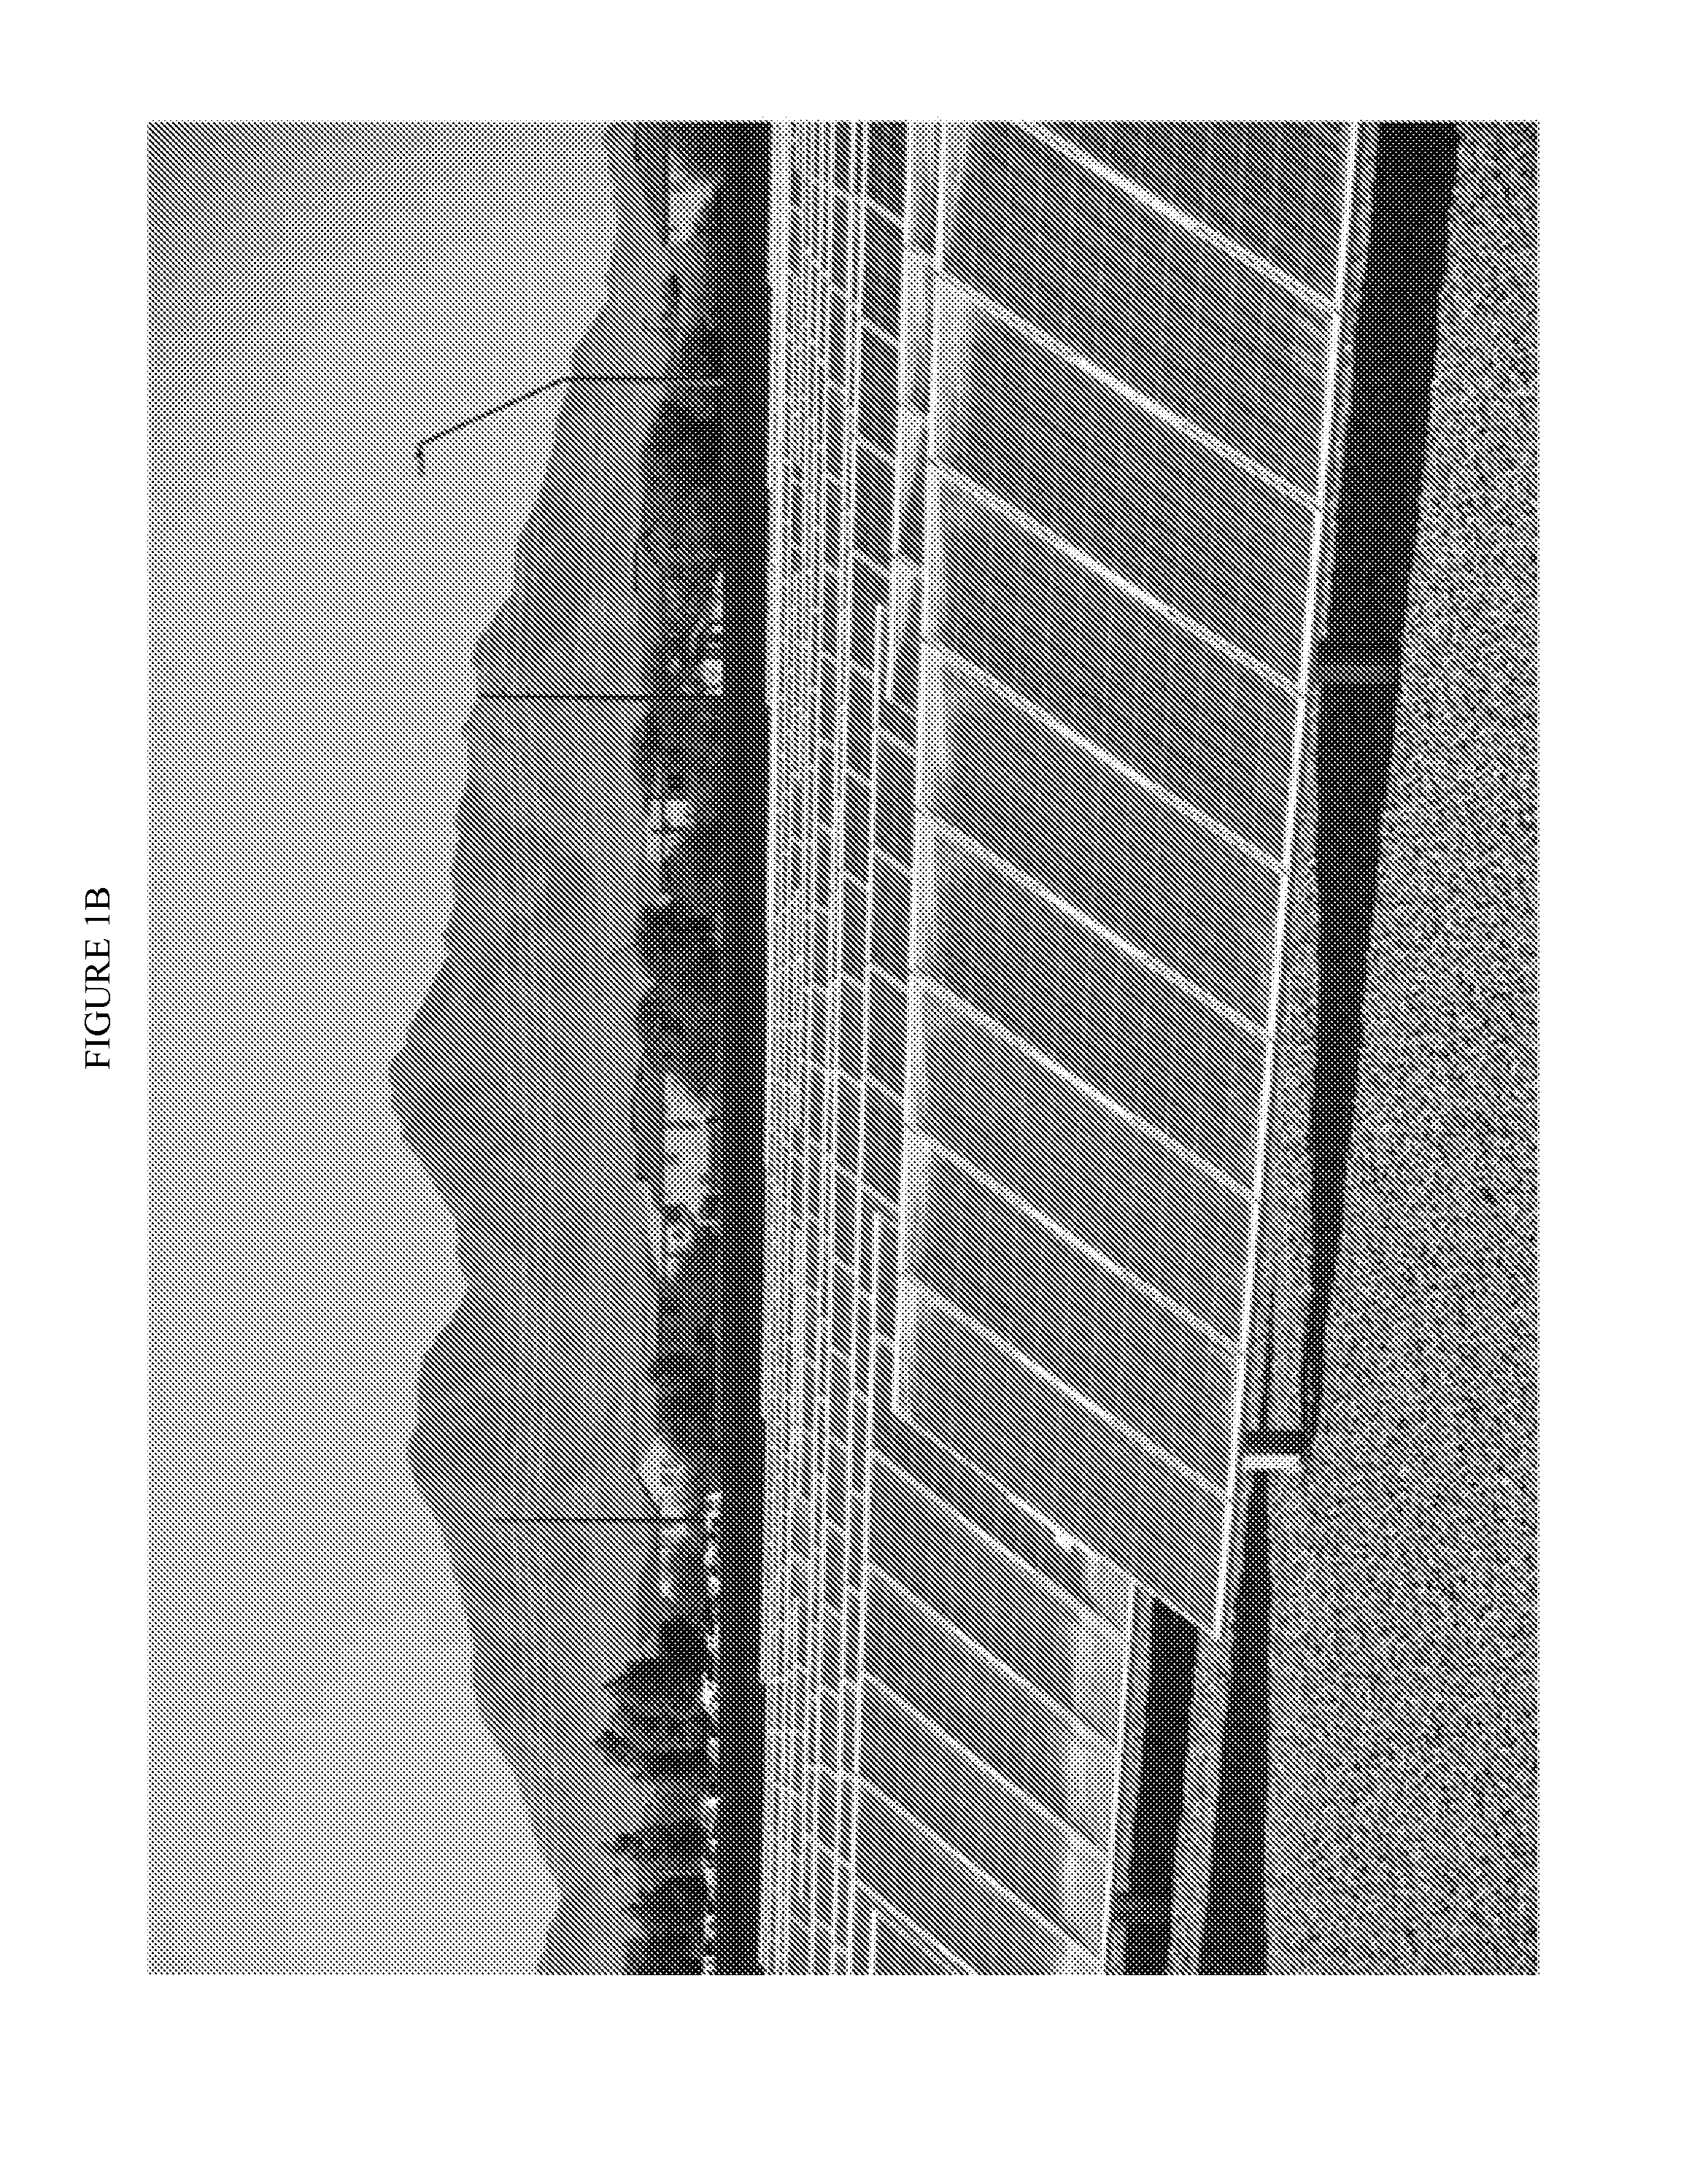 Soiling measurement system for photovoltaic arrays